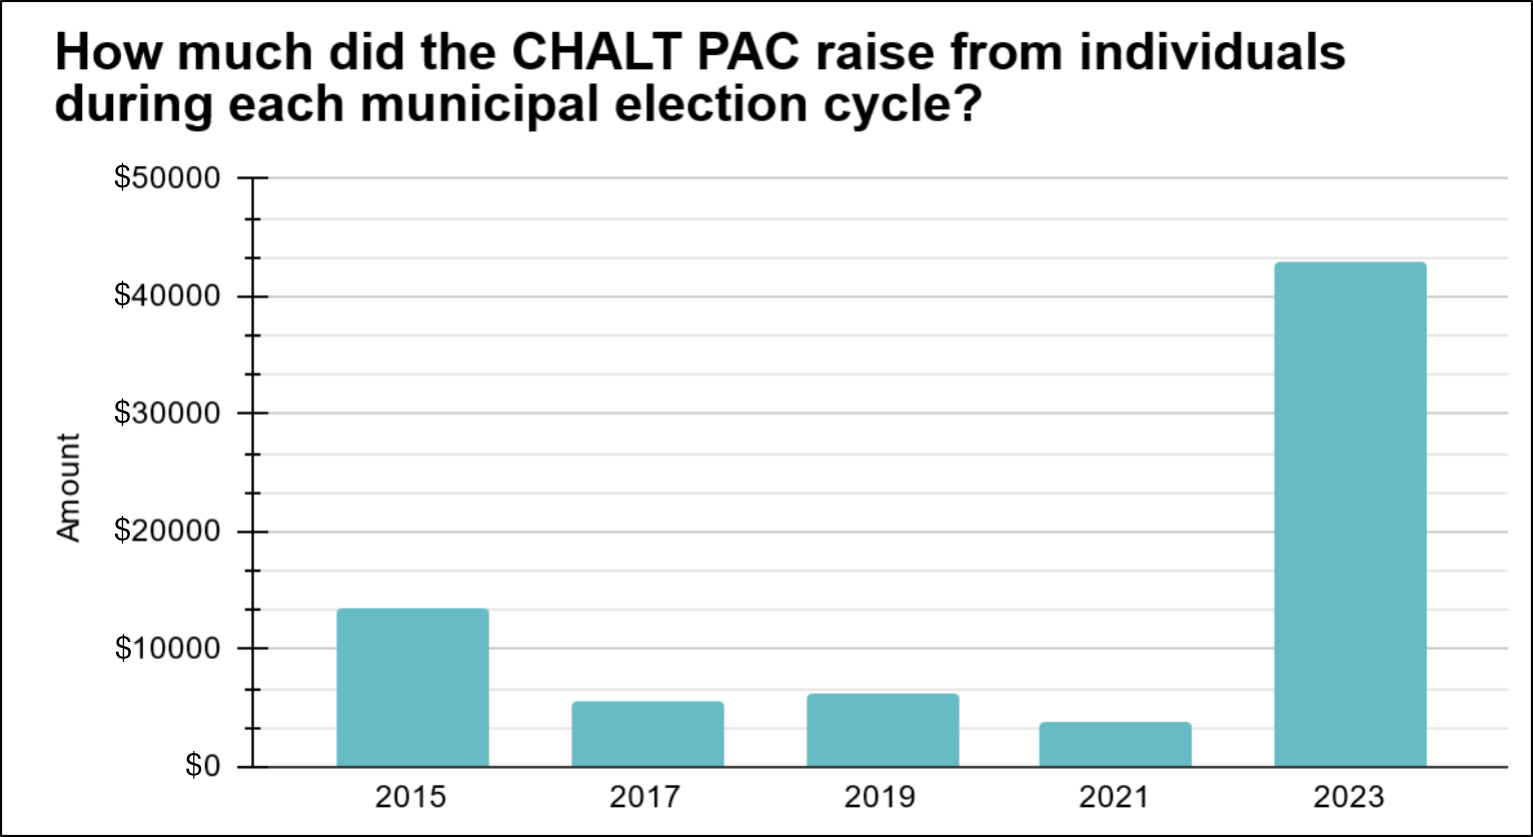 How much did CHALT PAC raise from individuals during each municipal election cycle.